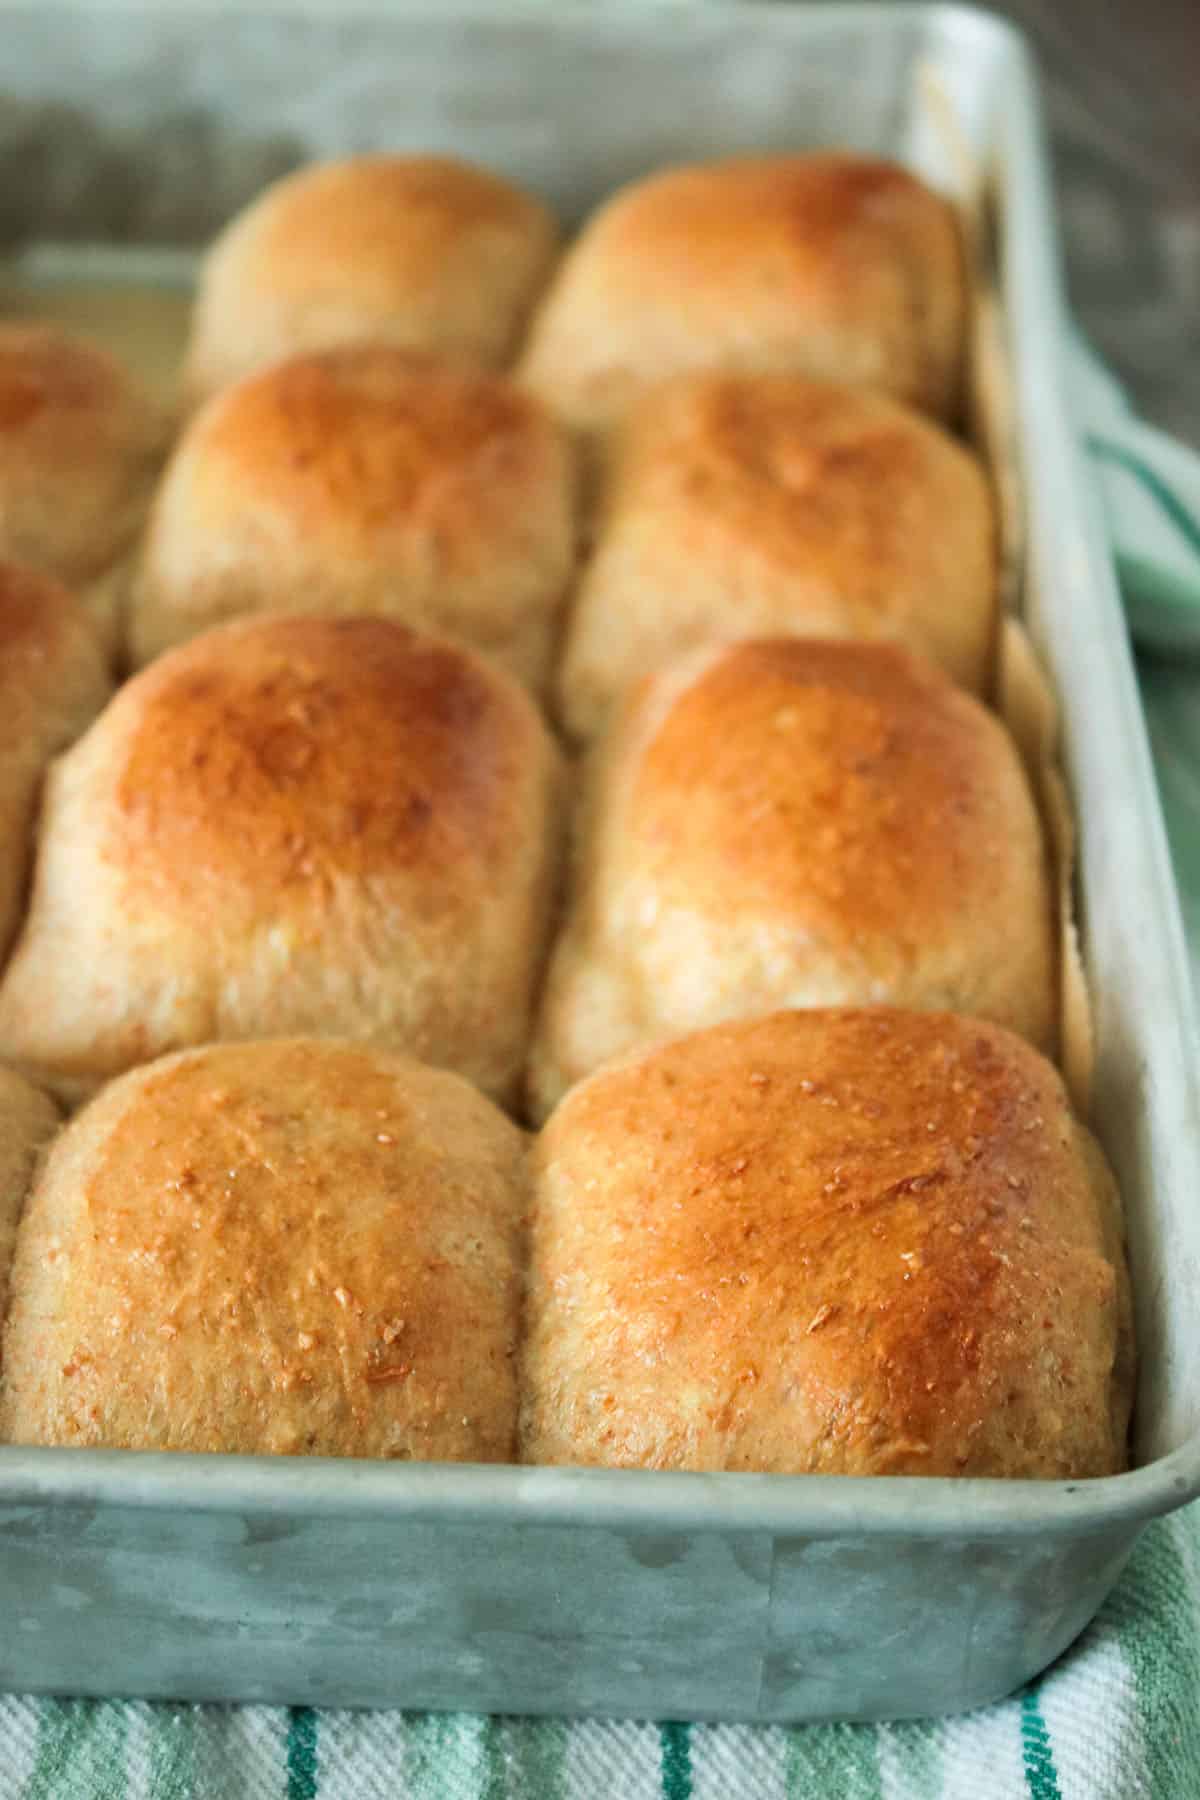 Freshly baked whole wheat potato dinner rolls in the pan.